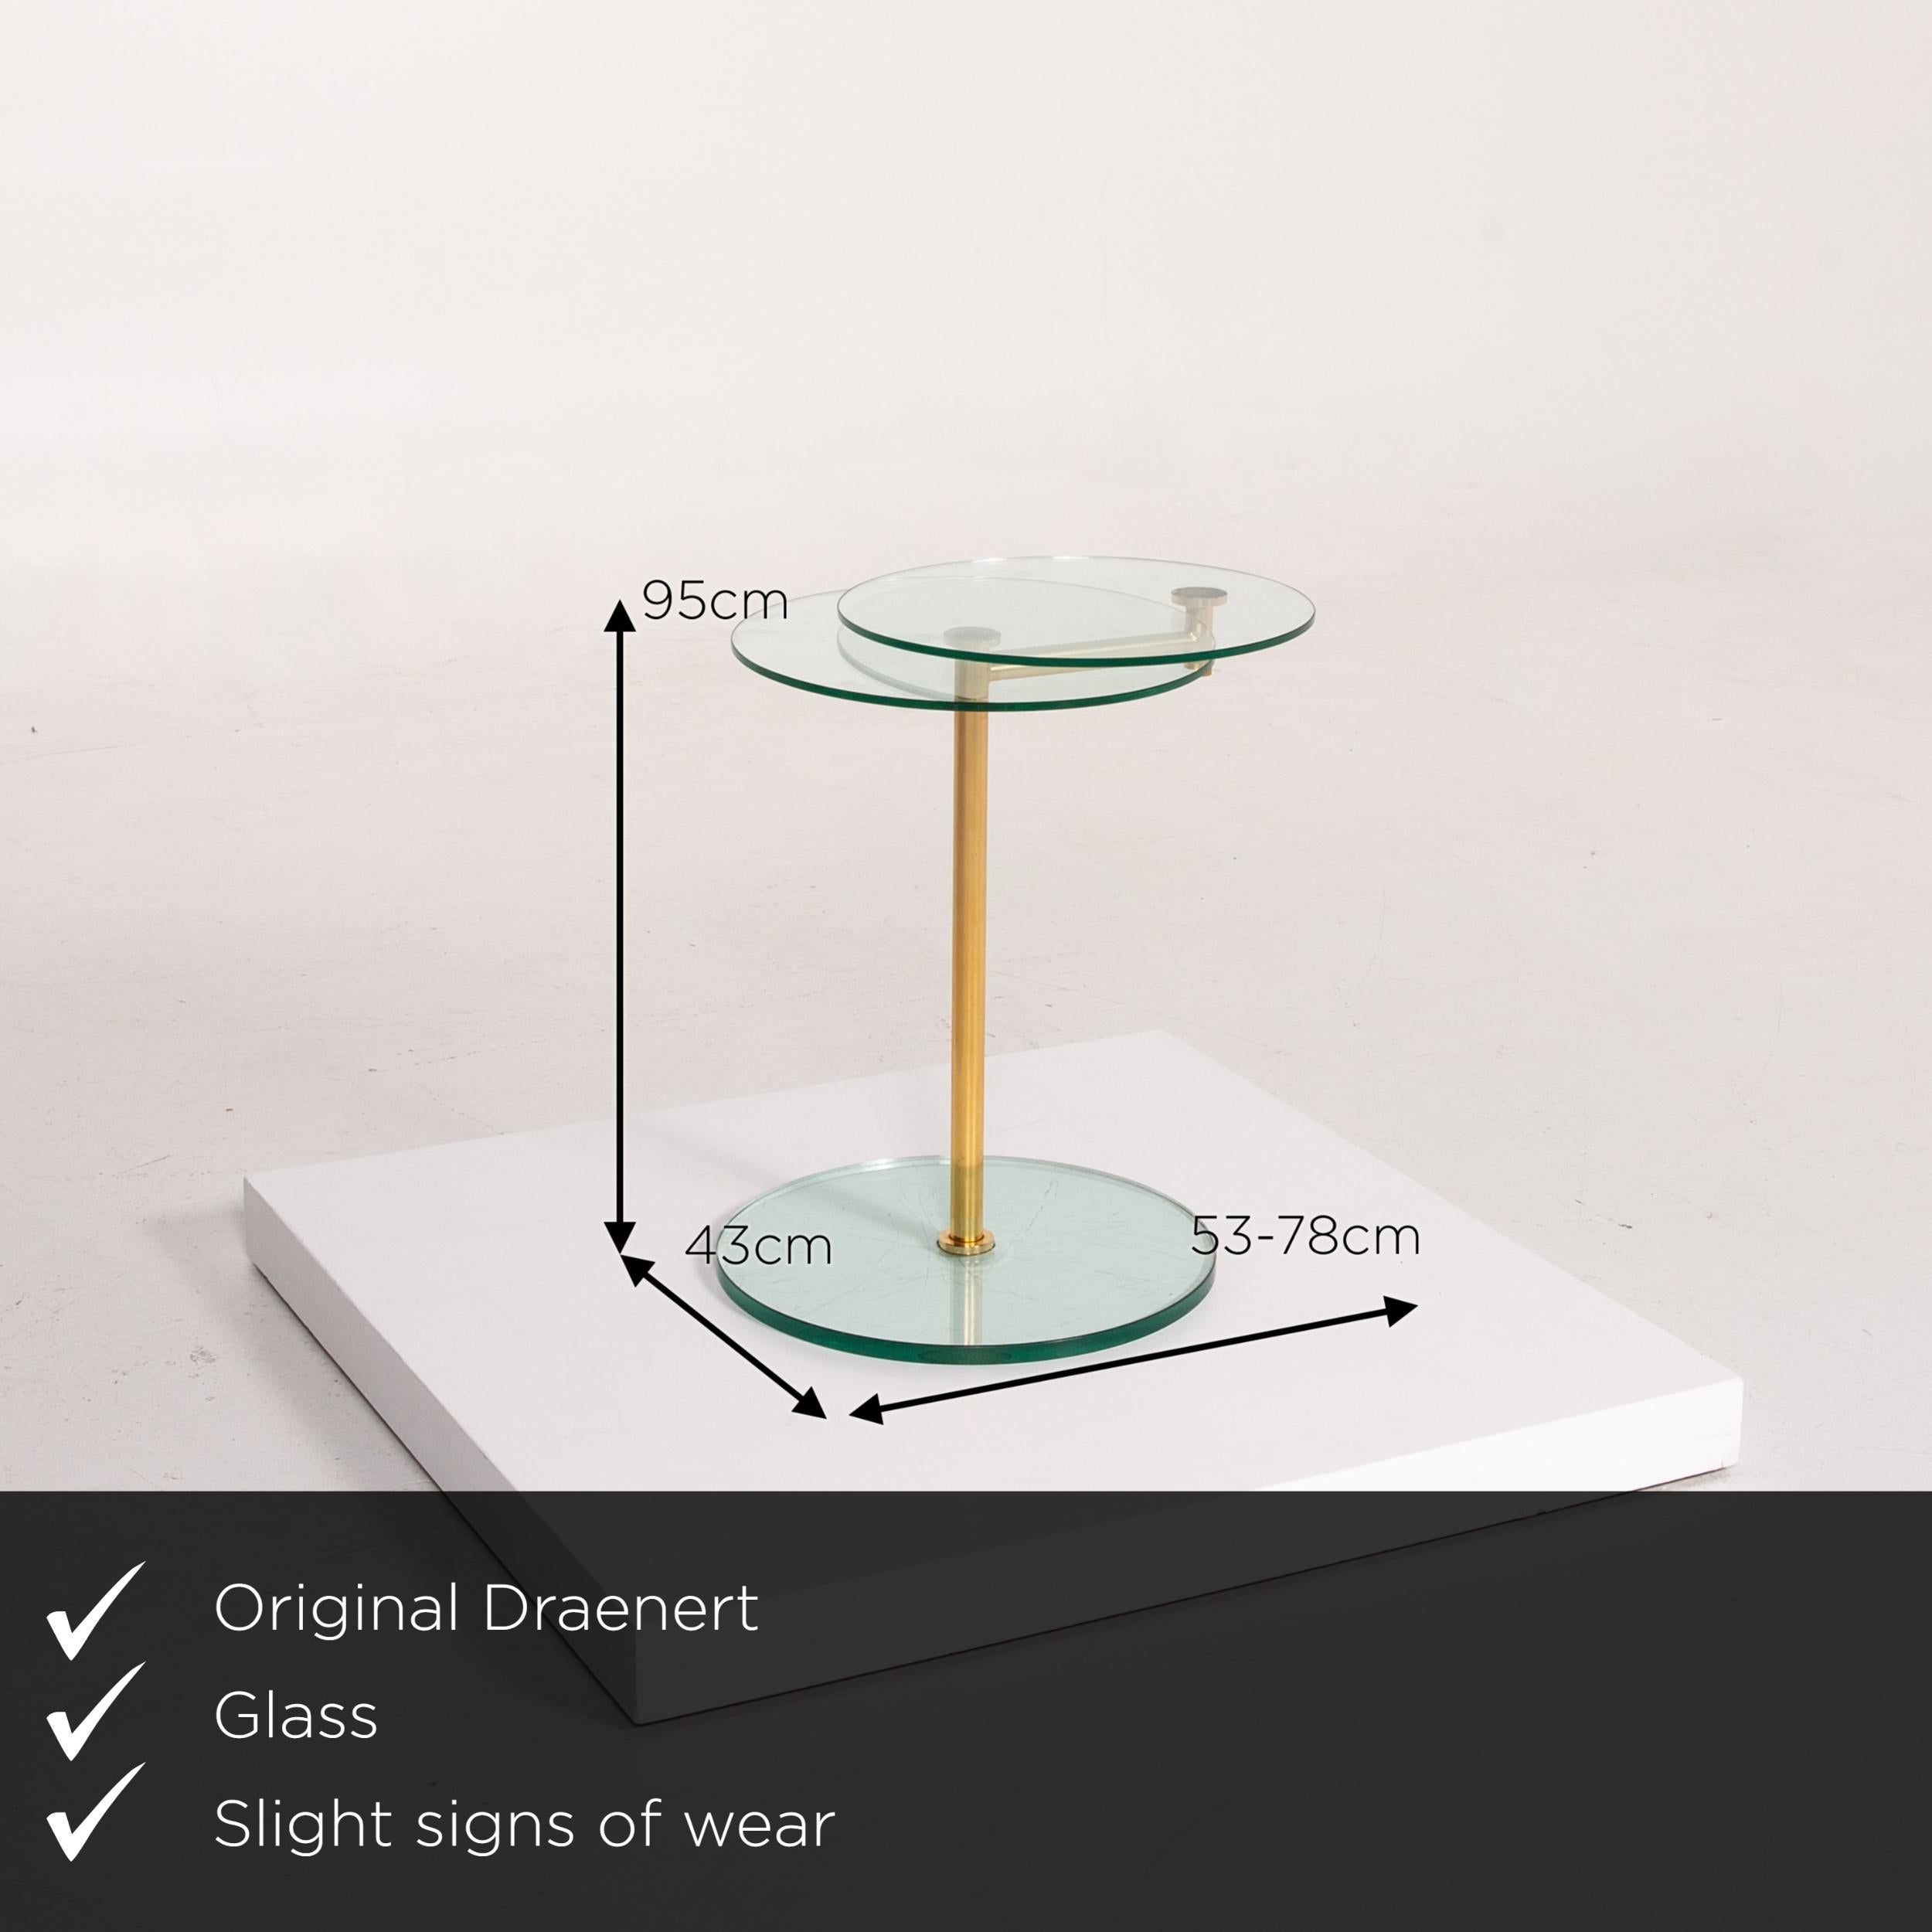 We present to you a Ronald Schmitt glass side table gold function coffee table adjustable table.

Product measurements in centimeters:

Depth 43
Width 53
Height 95.







   